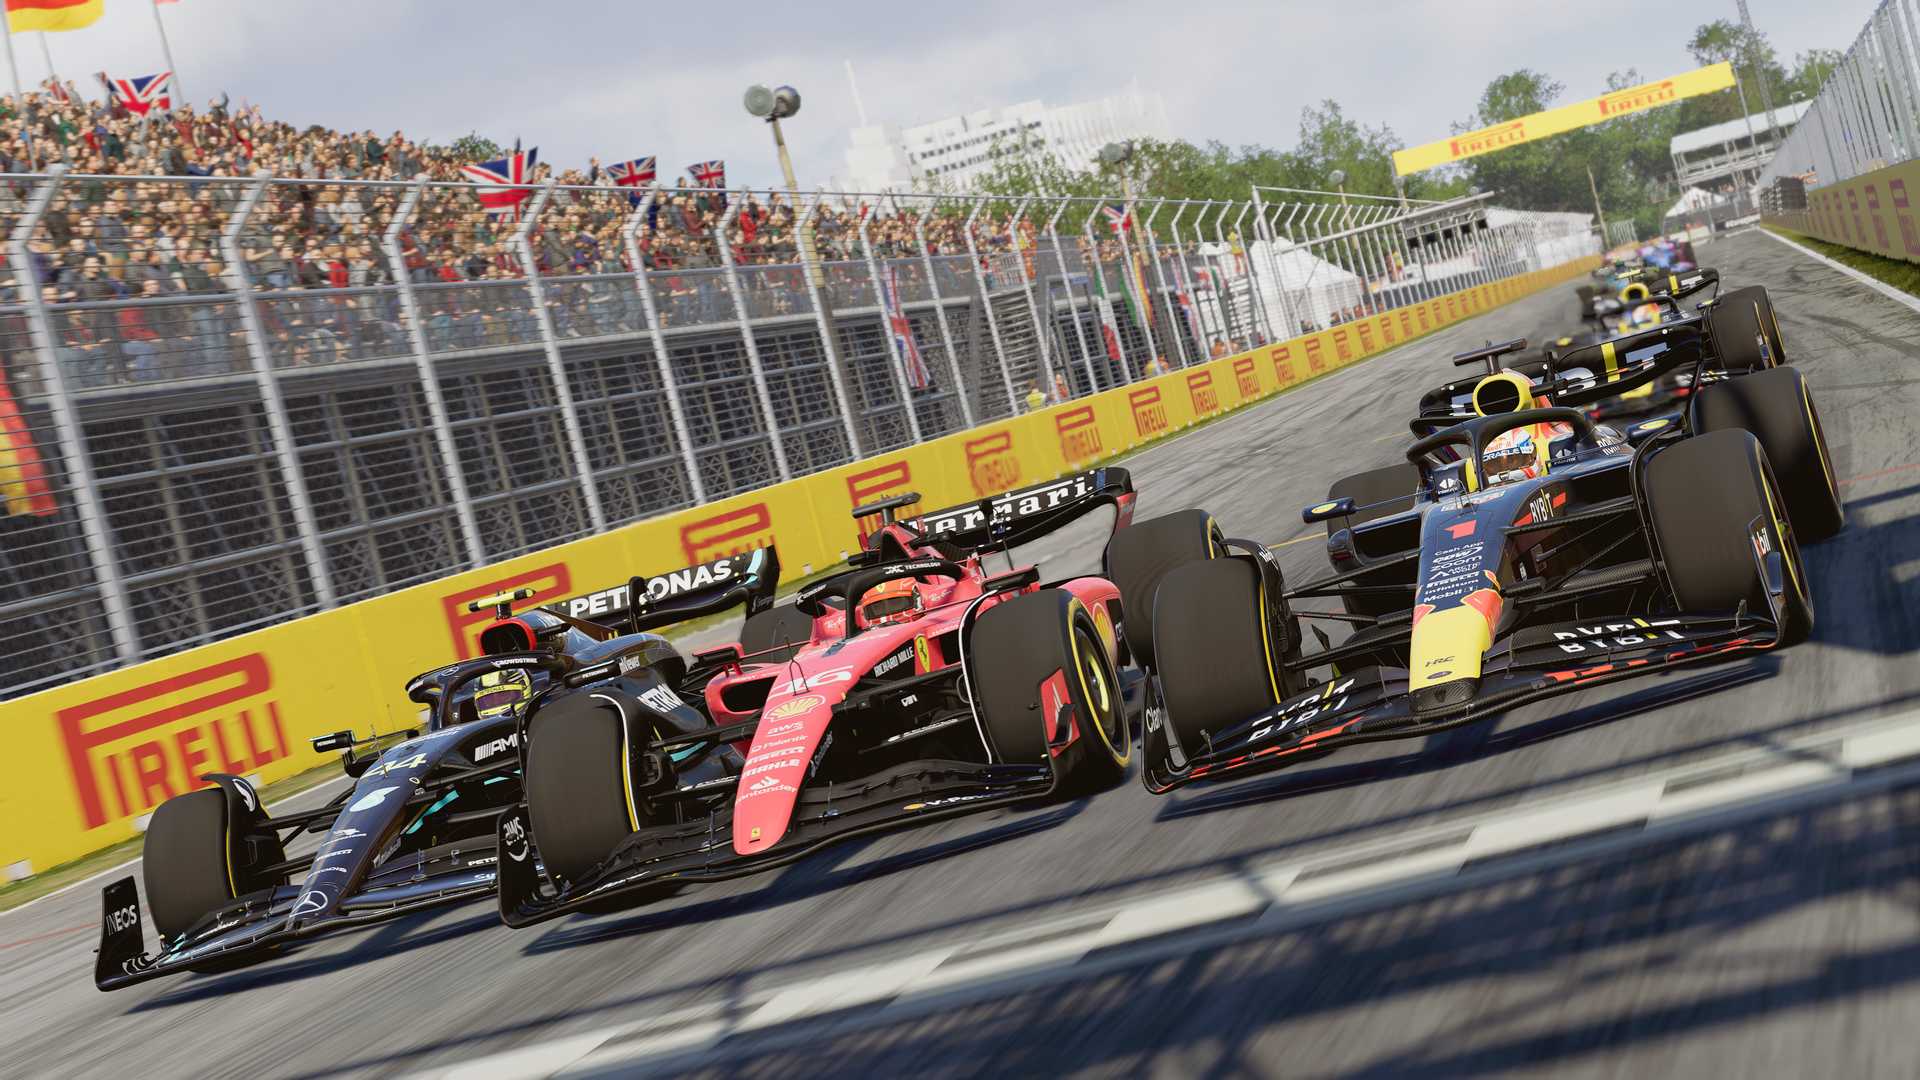 F1 23 reviewed Do new additions and return of story mode make it a must-buy? · RaceFans